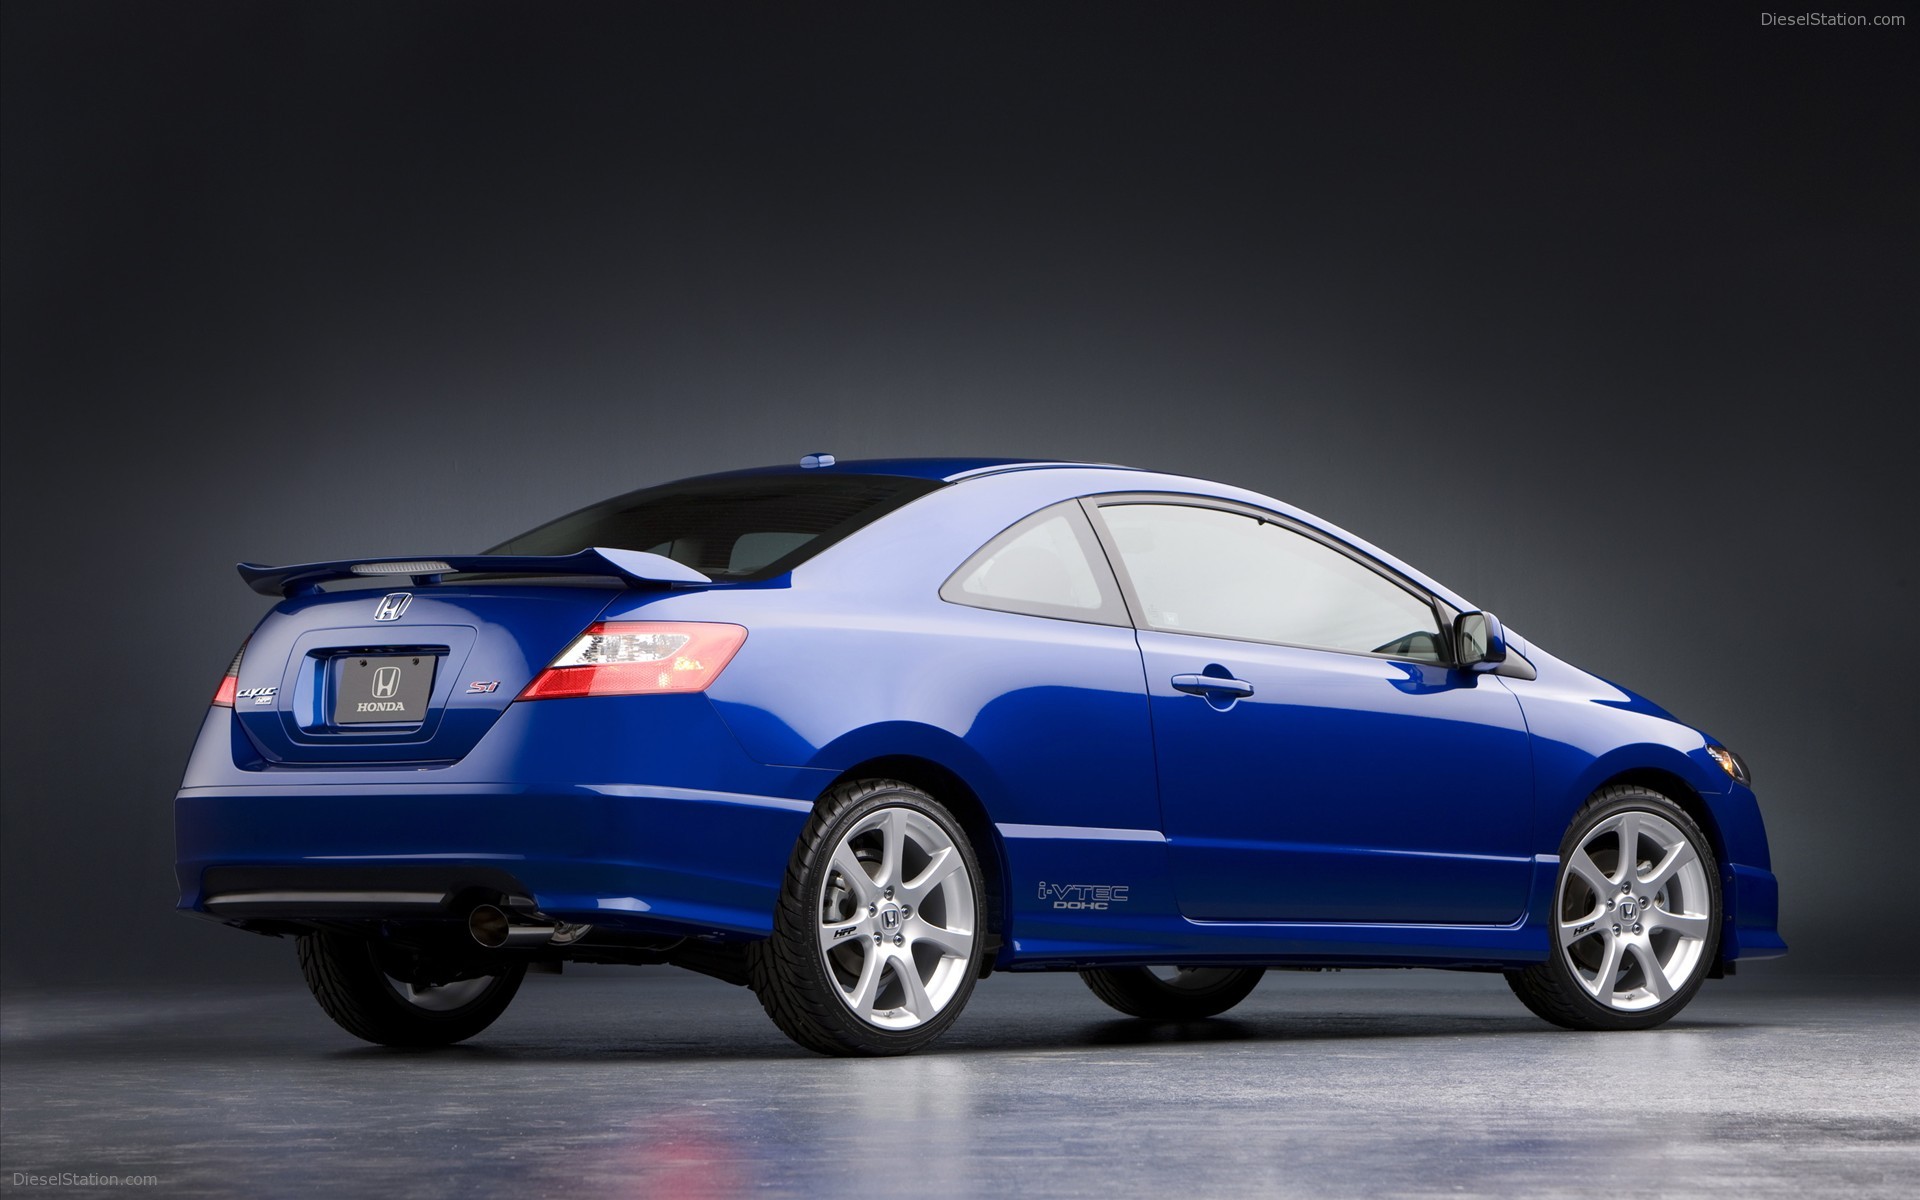 2009 Honda Civic Coupe - Car Wallpapers at Dieselstation